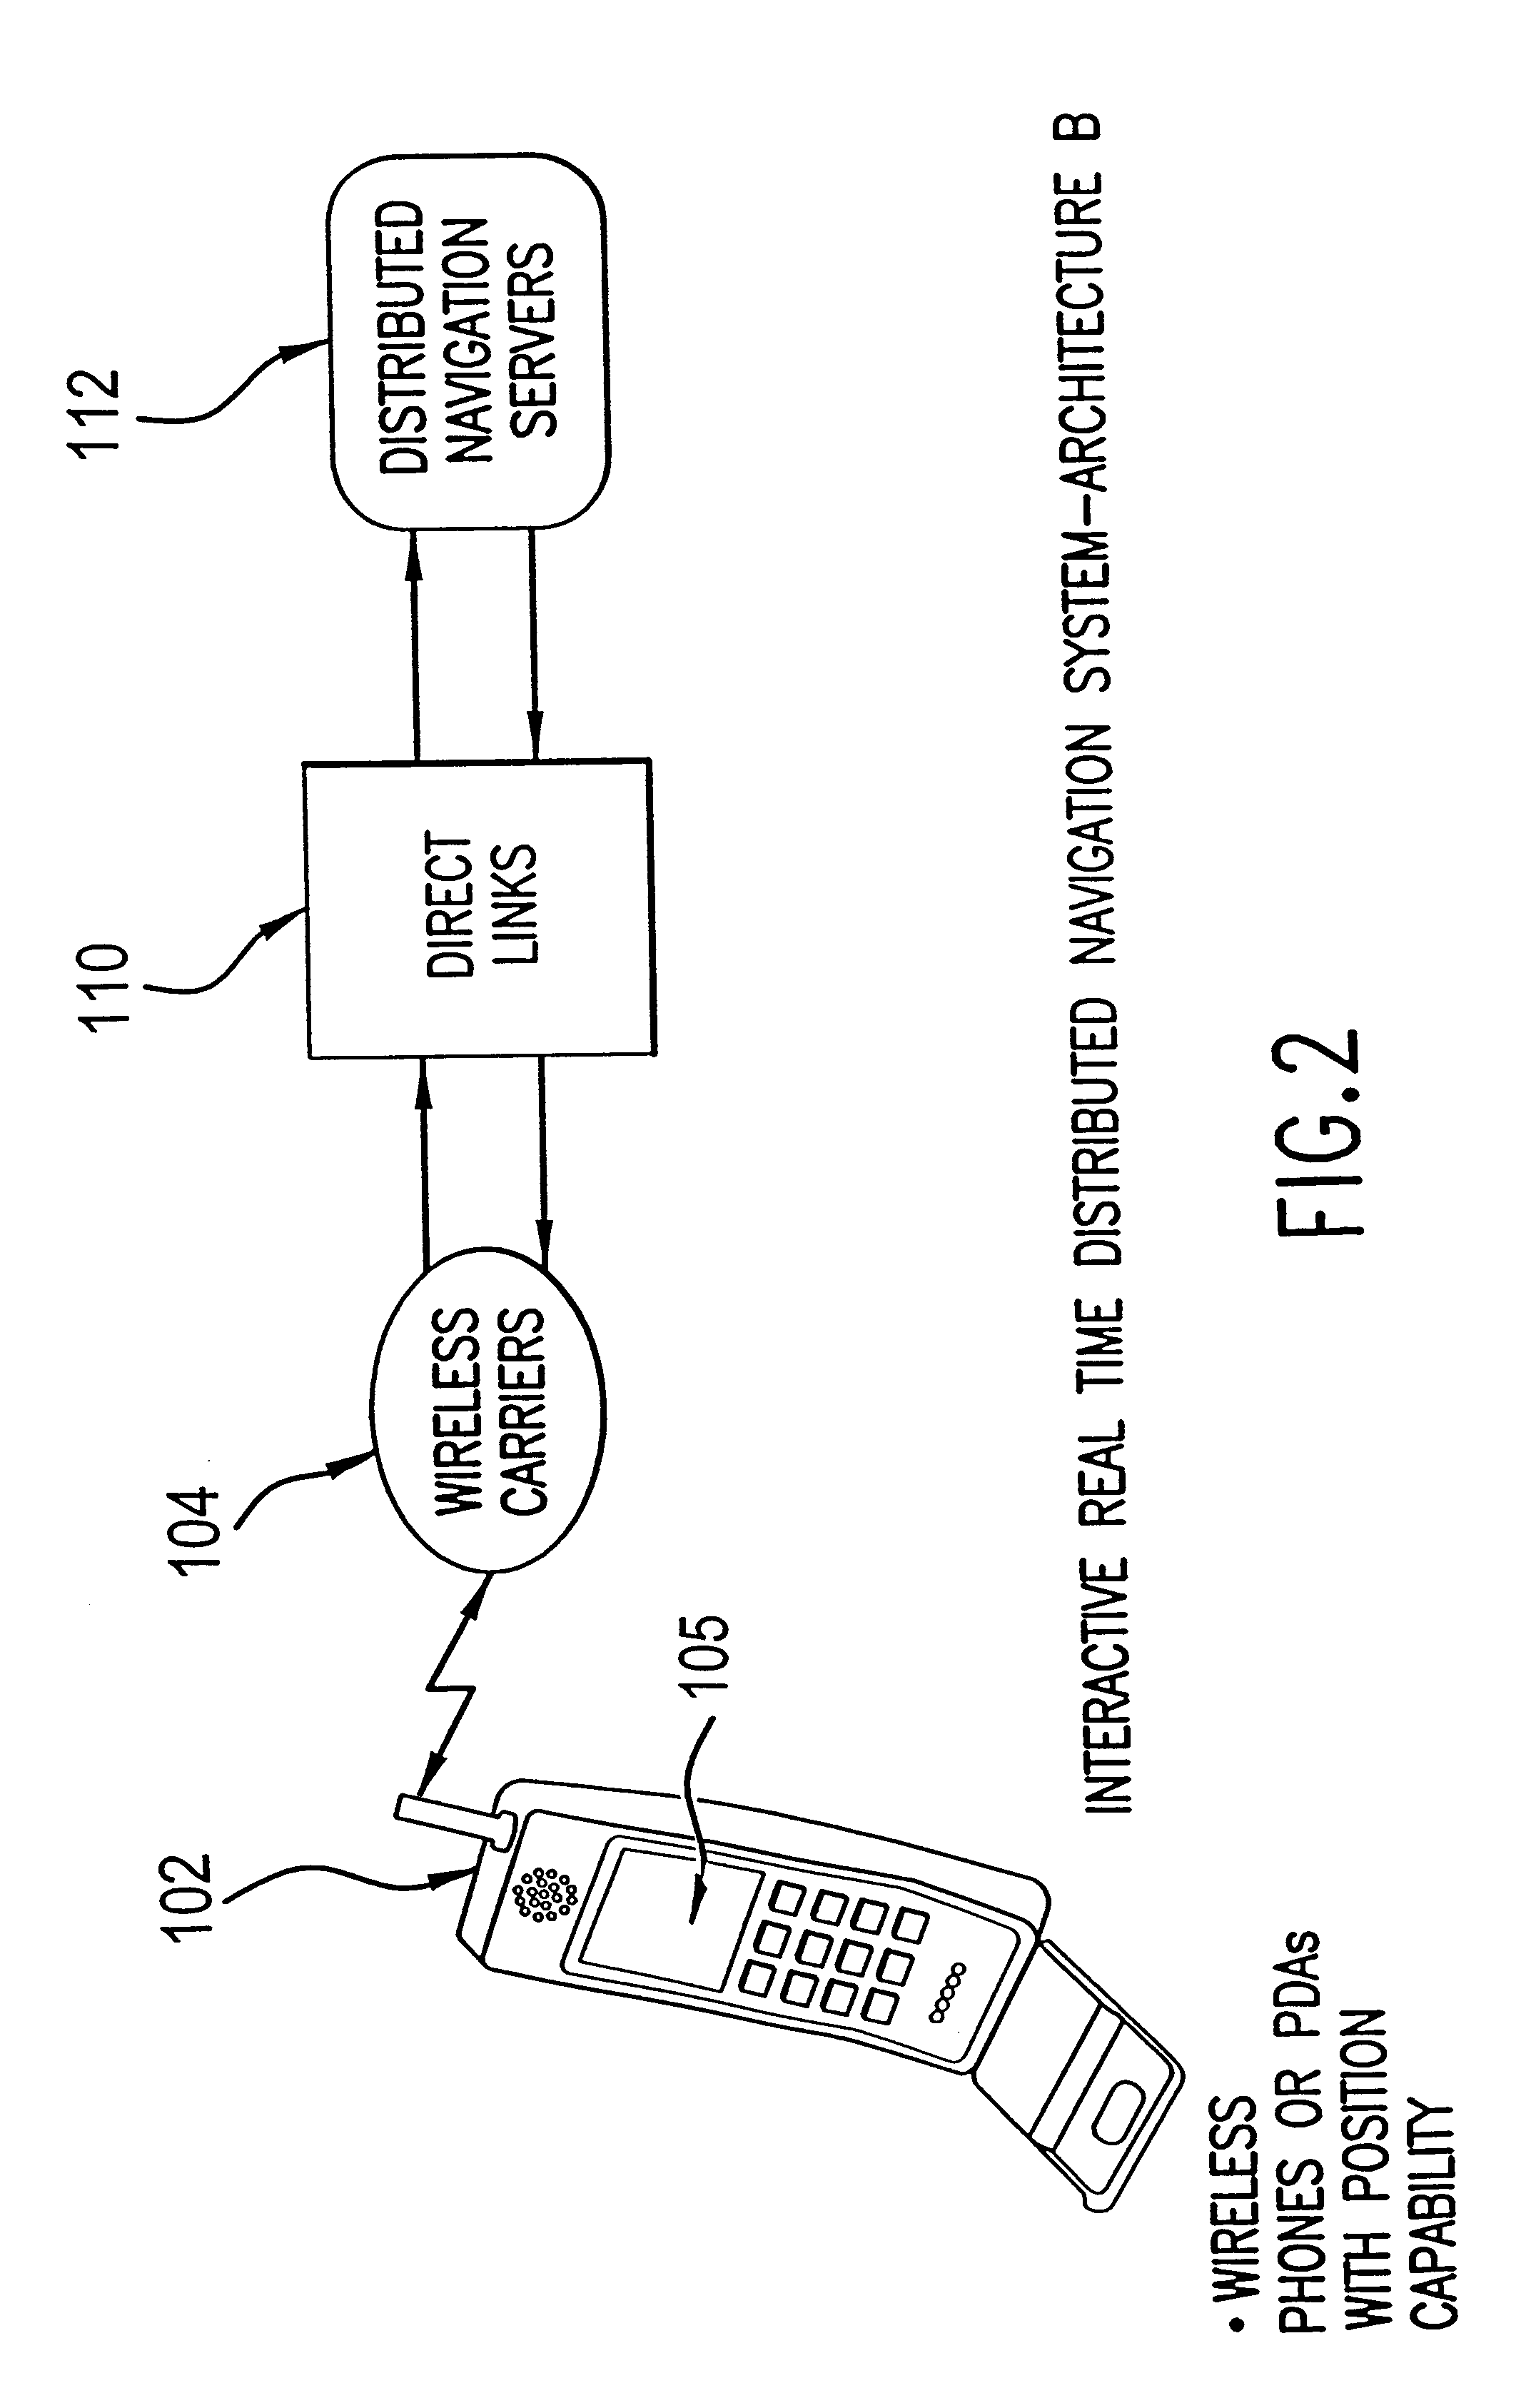 Method and system for real-time navigation using mobile telephones